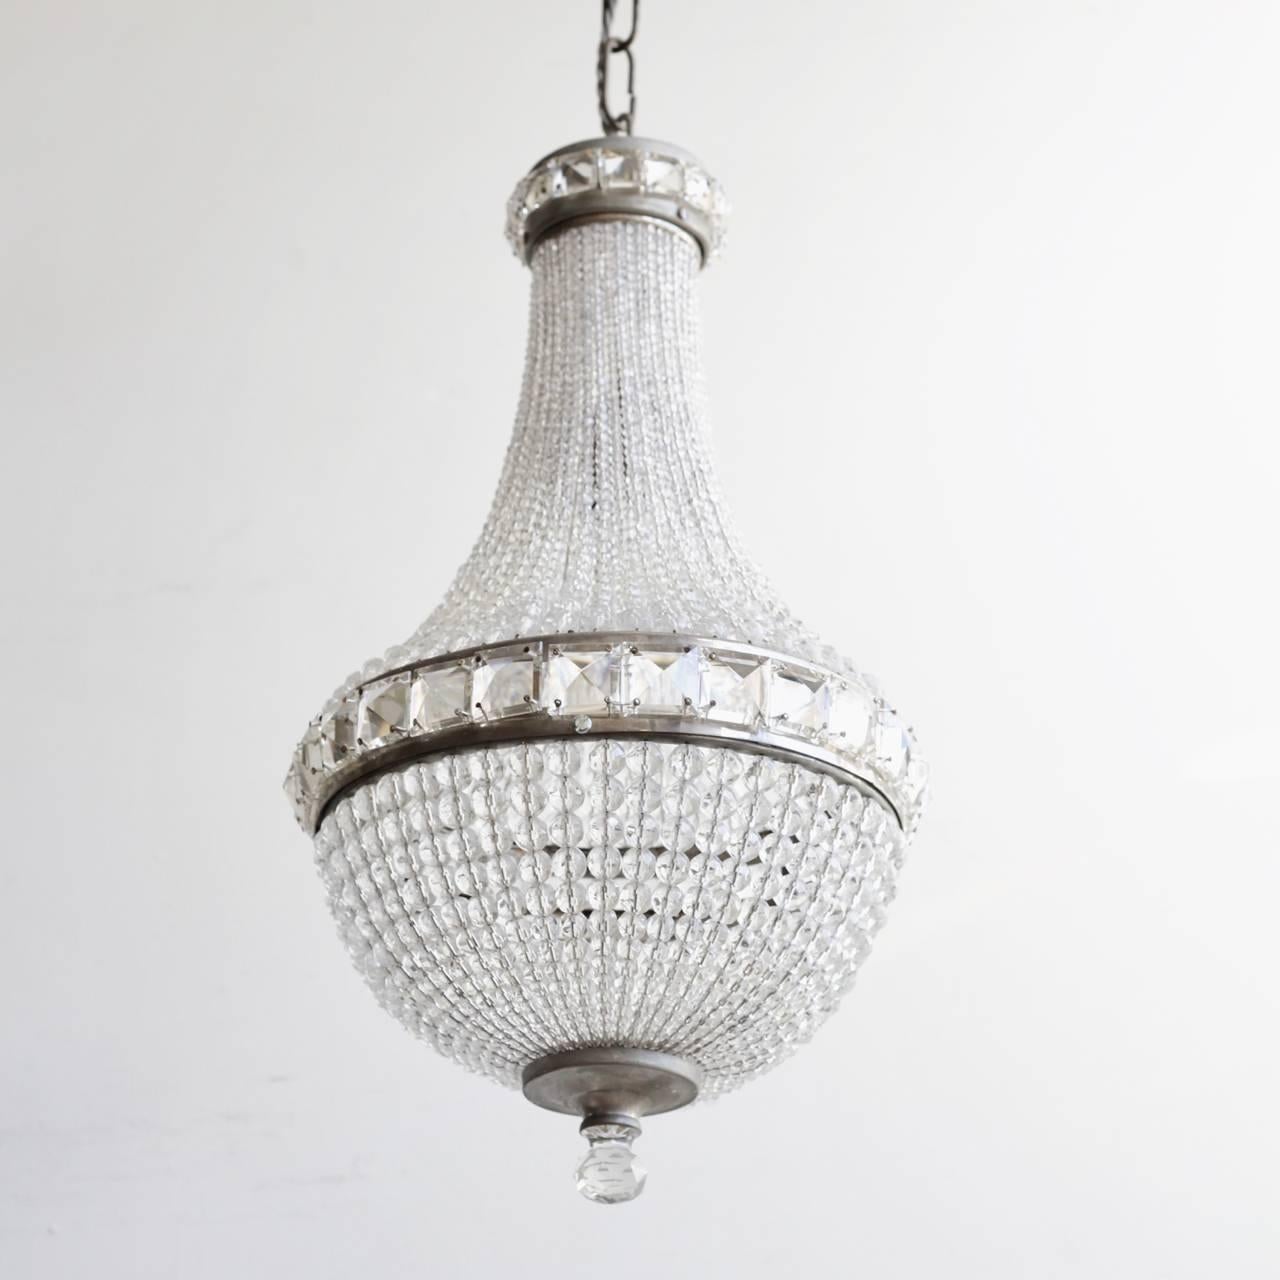 This crystal balloon chandelier originates from 1930s Czechoslovakia. The chandelier is in immaculate condition retaining all of its original Czech crystal. The main body of the chandelier is made from strings of ascending crystal beads. The frame